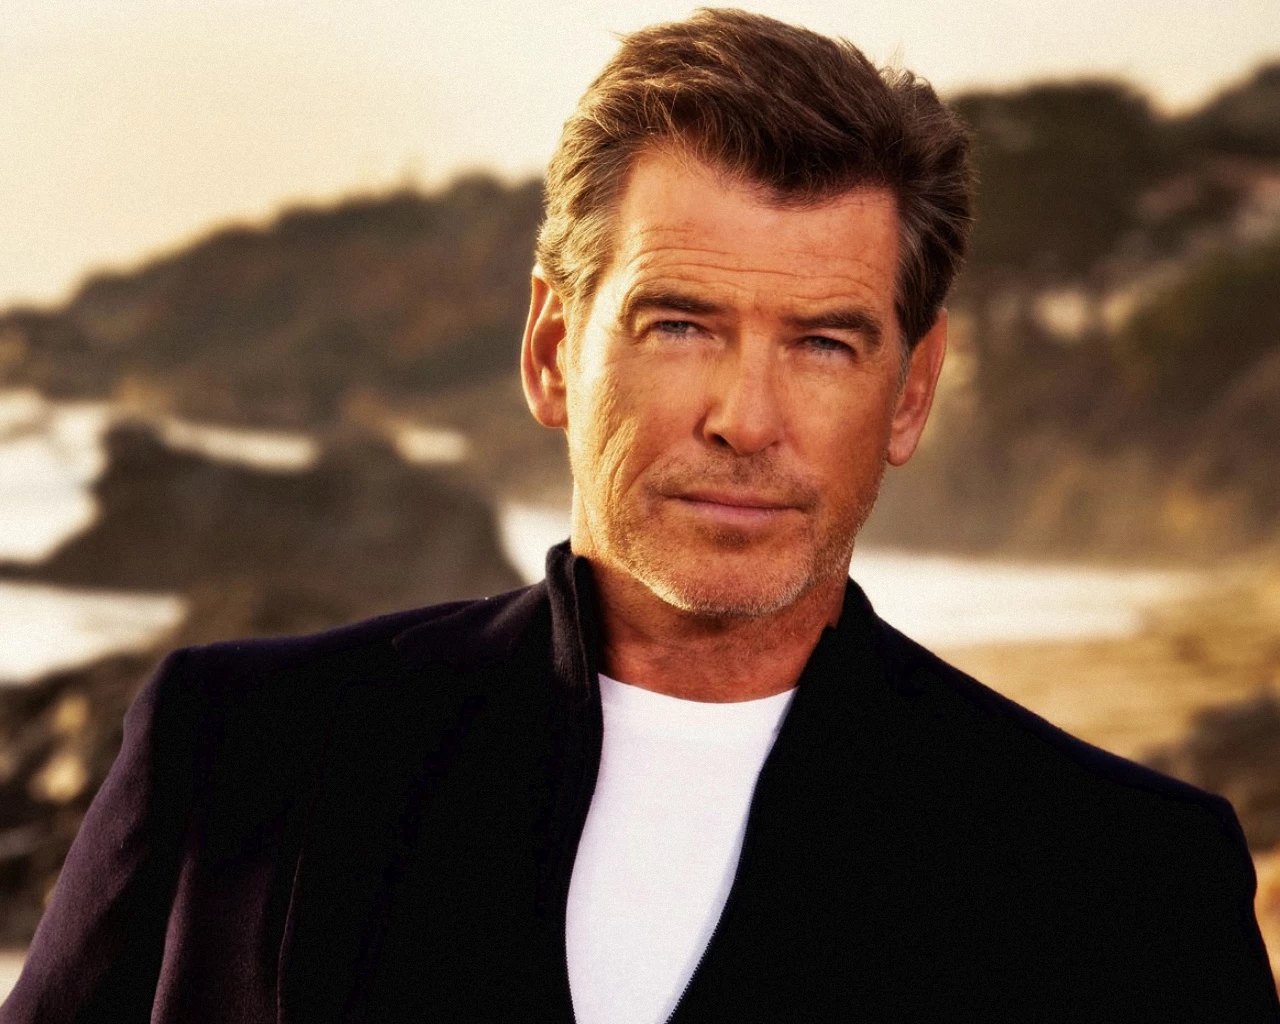 Former James Bond Pierce Brosnan says it's time a woman gets the role